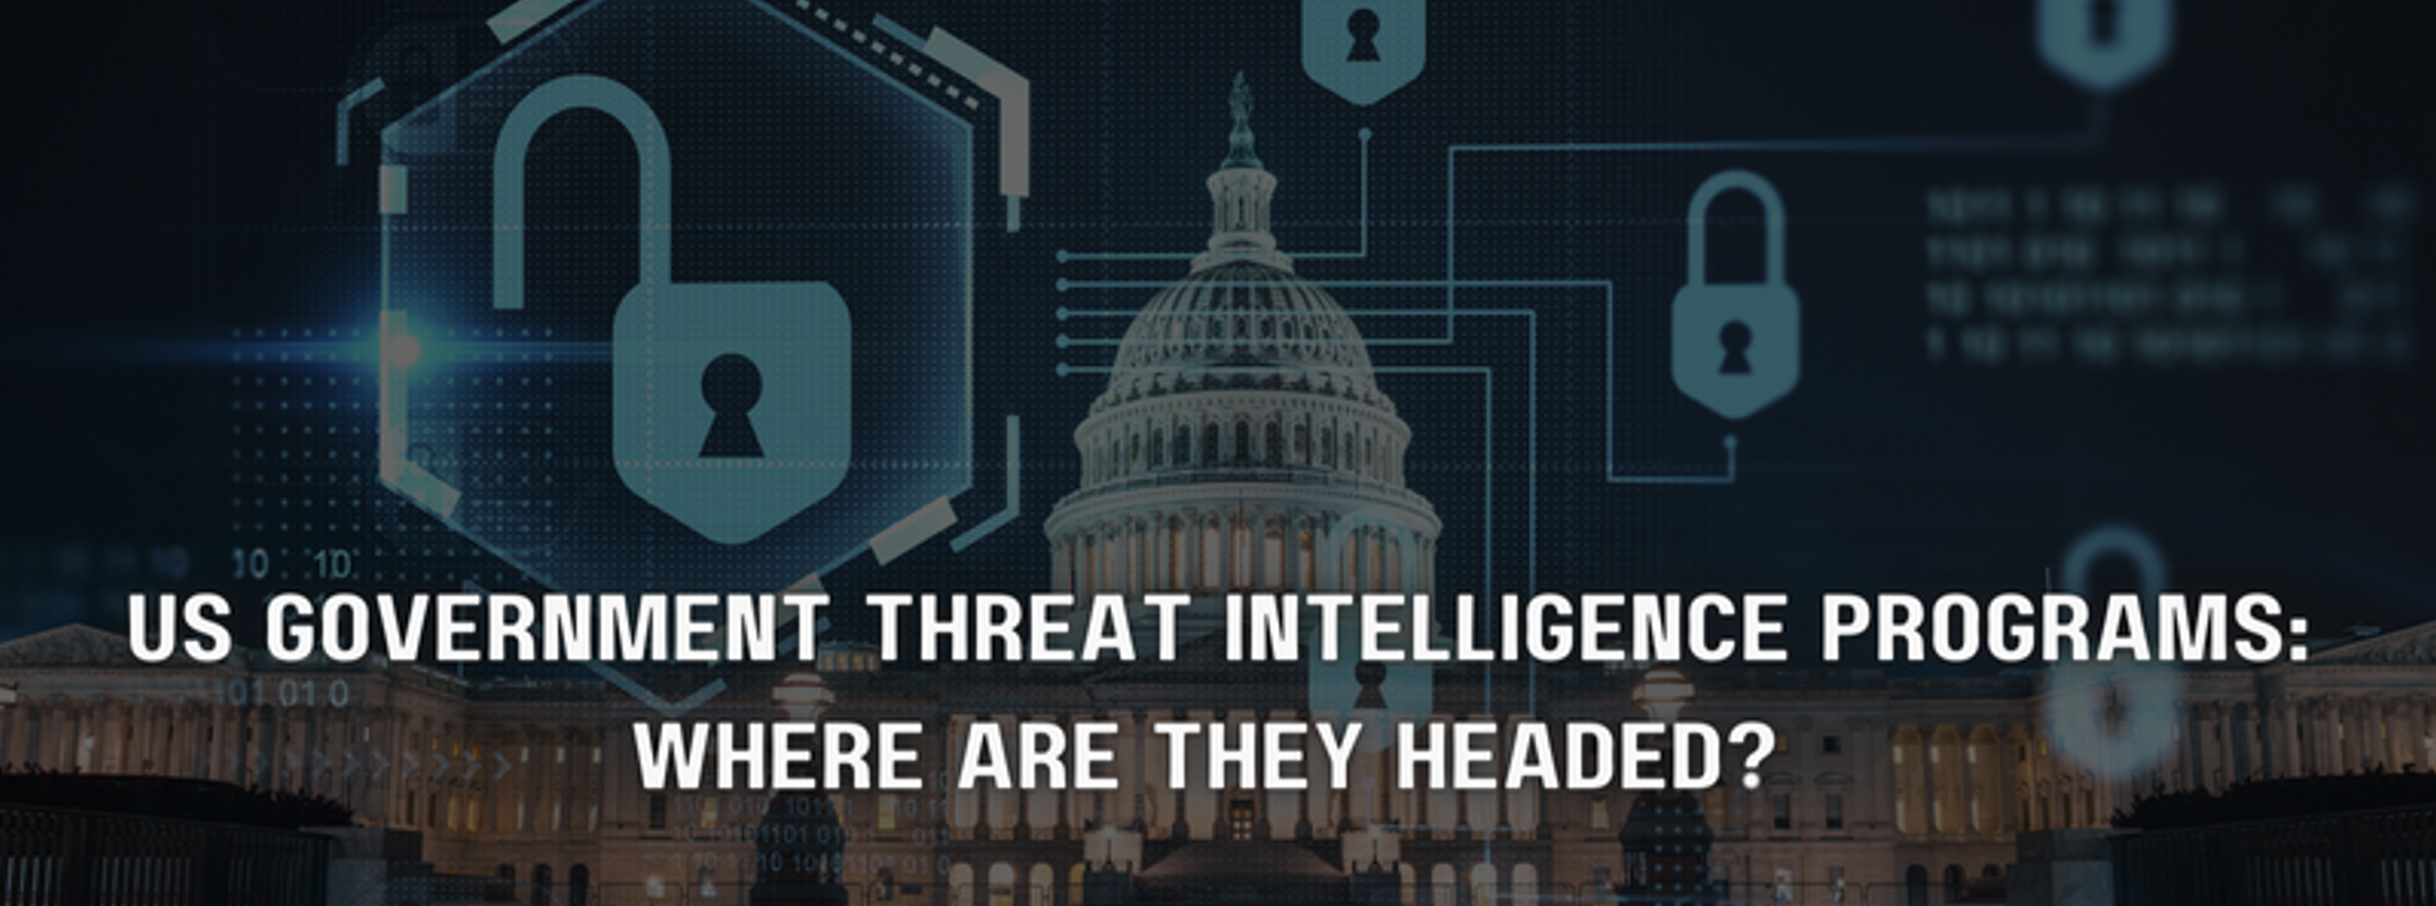 US Government Threat Intelligence Programs: Where Are They Headed?